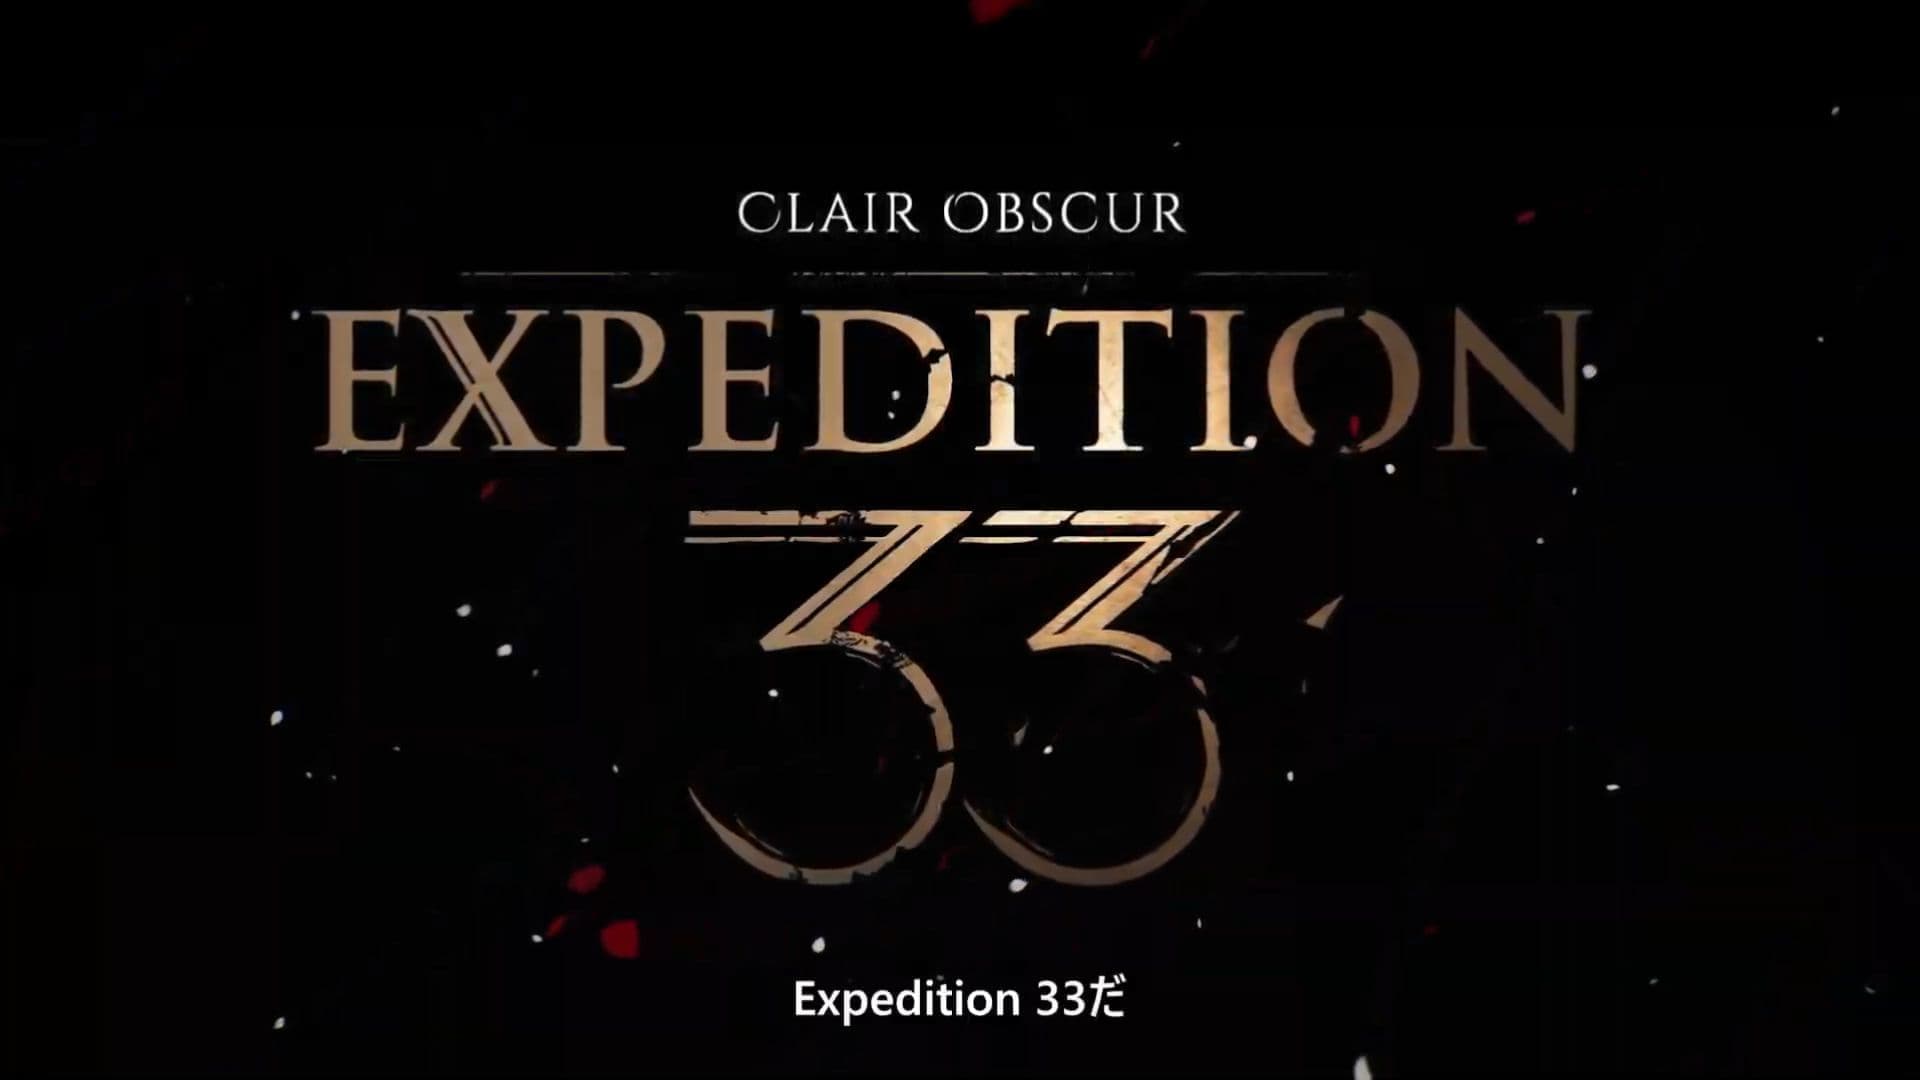 『Clair Obscur: Expediti』が発表。呪い数字を描く「ペイントレス」の死の輪廻を打ち砕く旅を描く新作RPG_008